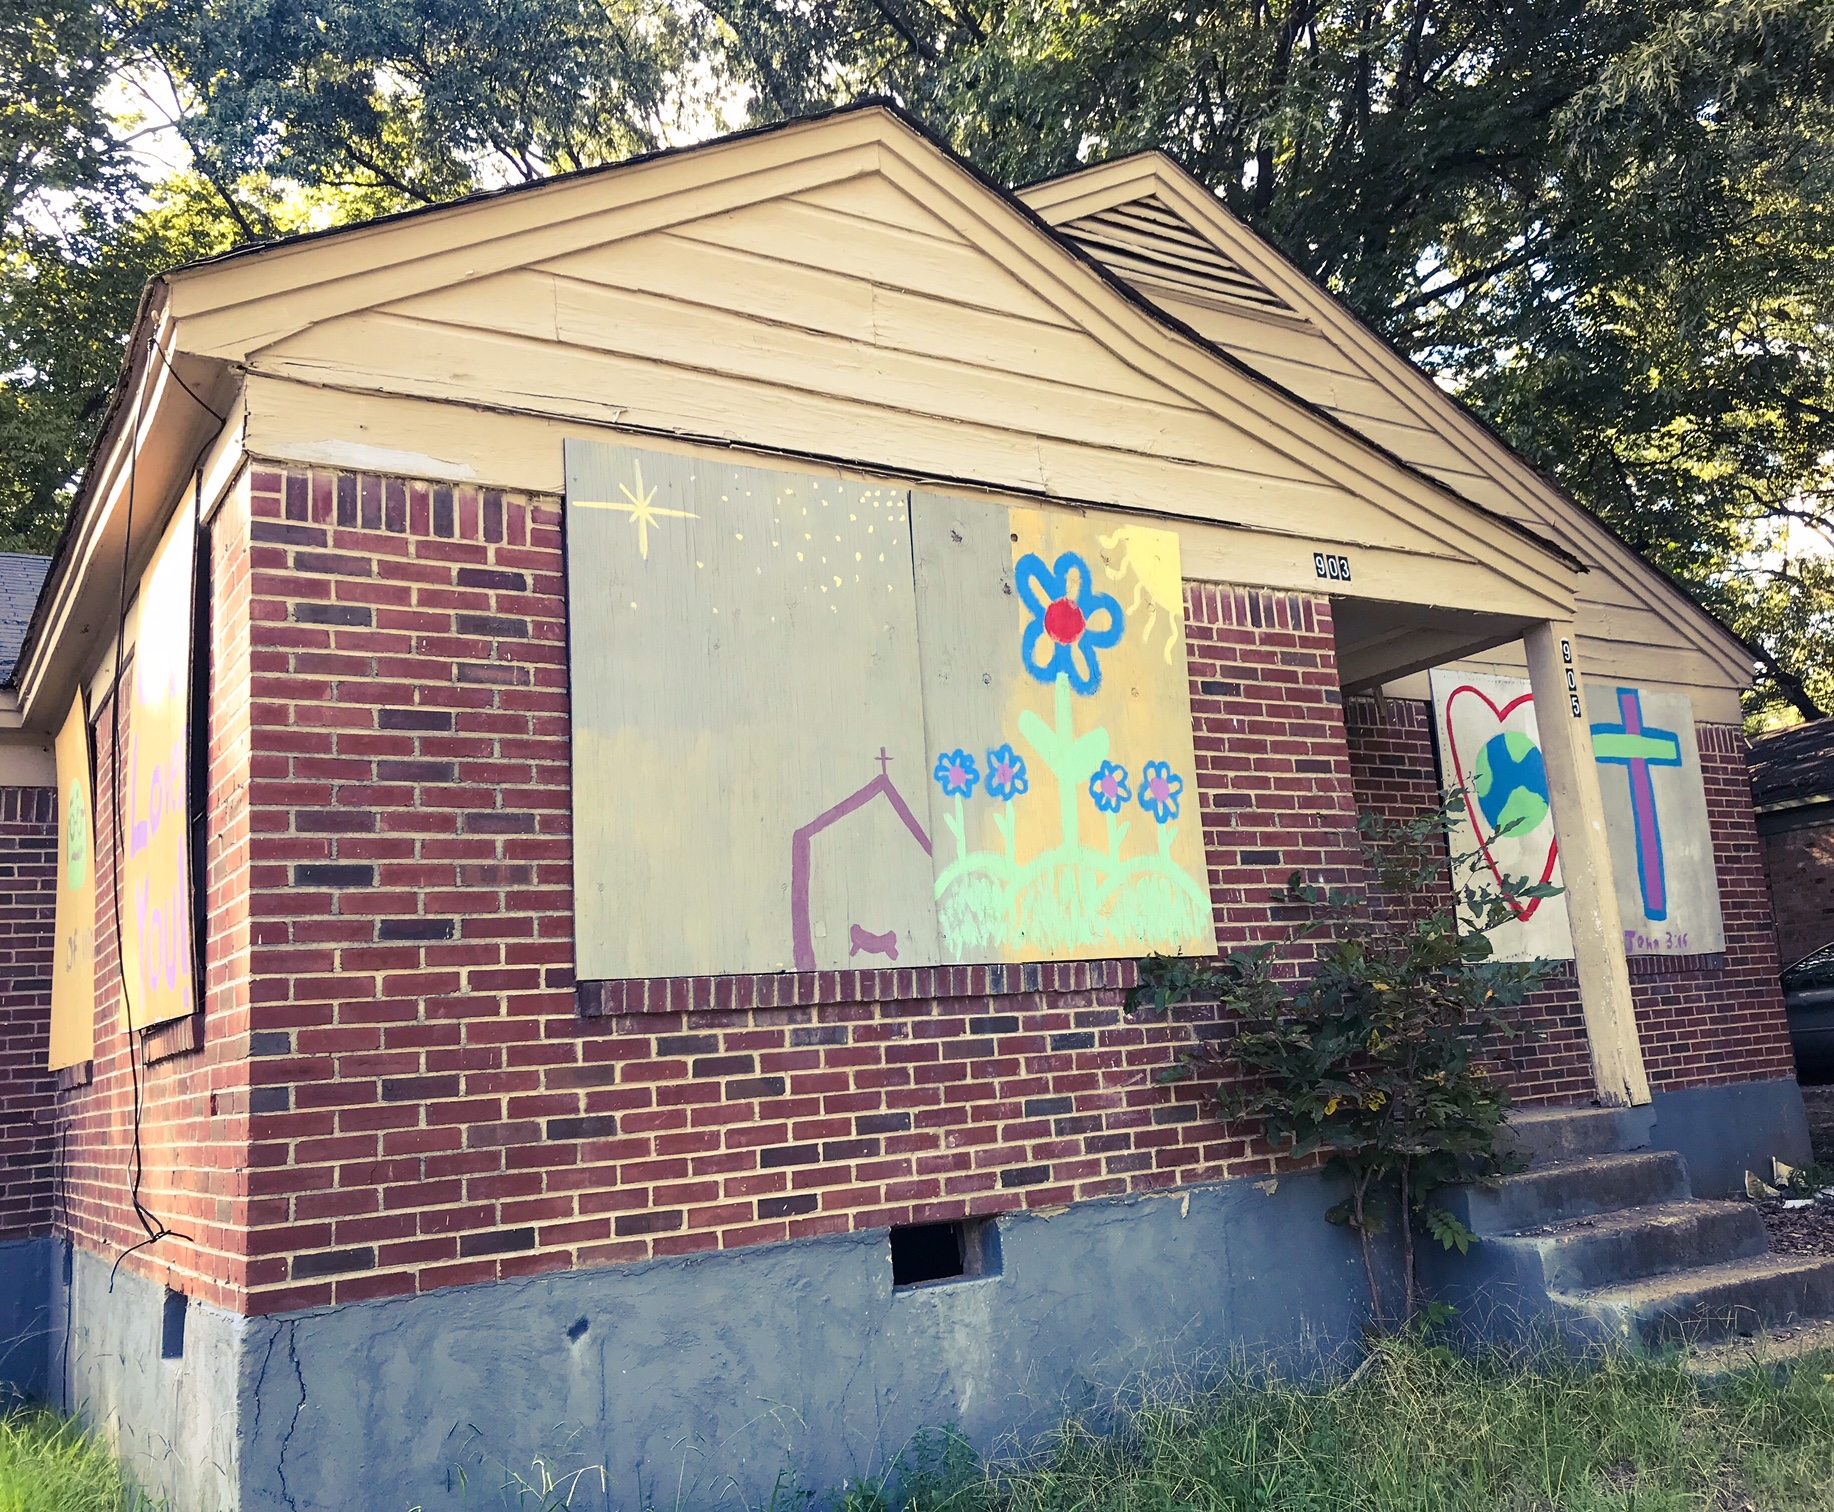 Community members boarded up a blighted house in Mitchell Heights and painted it with colorful artwork. (Cole Bradley)